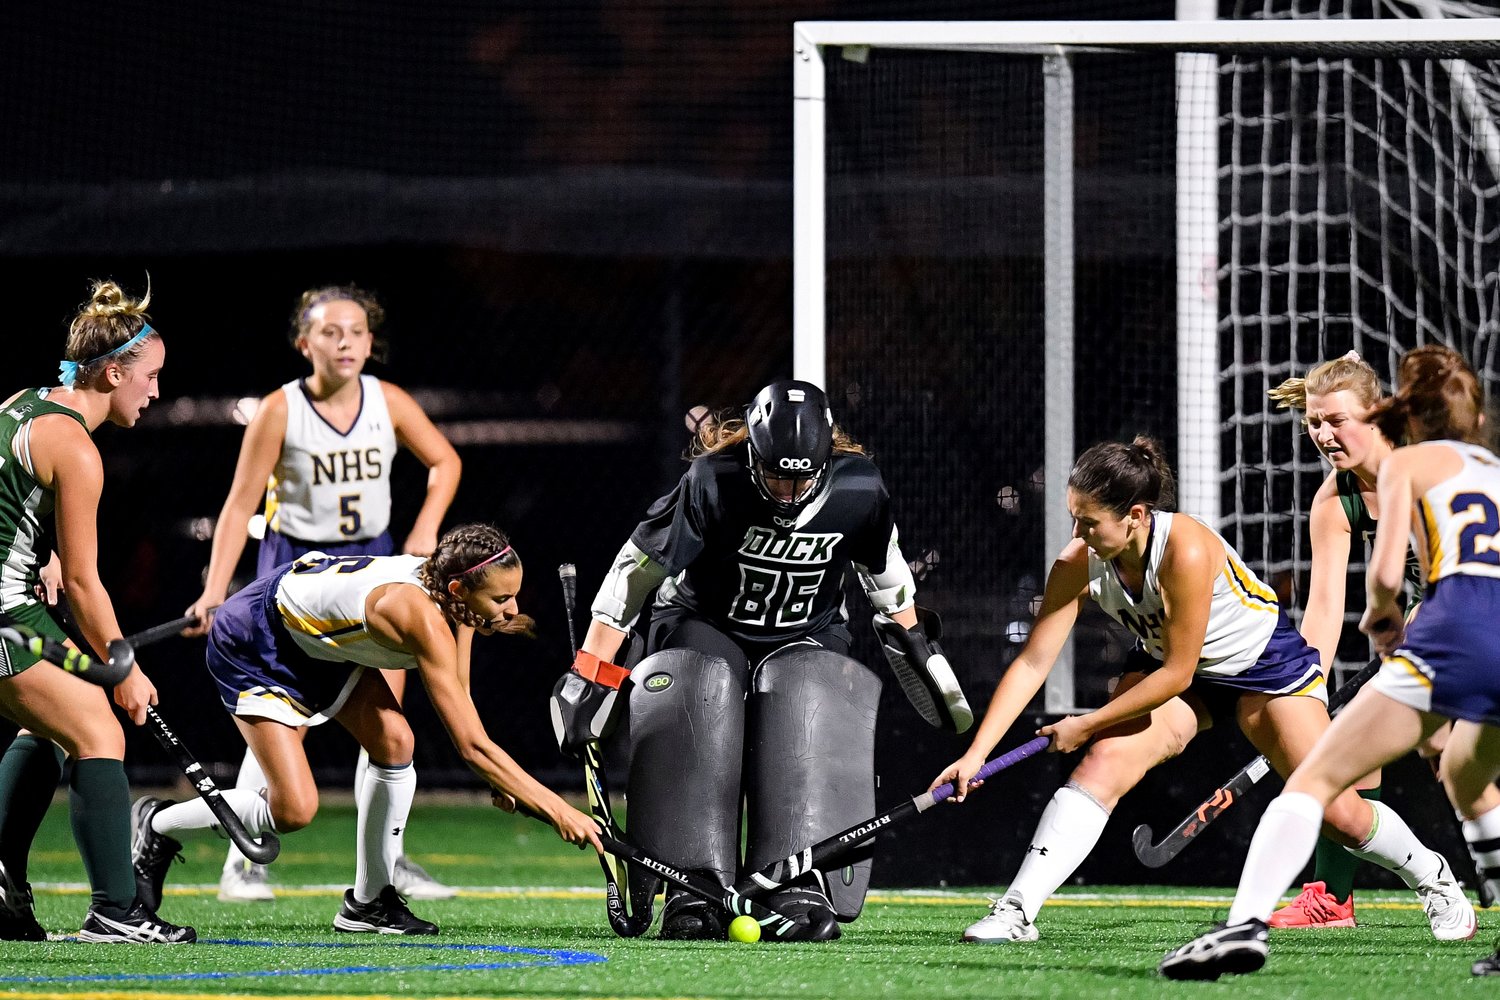 New Hope-Solebury had a good scoring chance late in the fourth quarter when Olivia Conte and Mia Patino got a shot on Dock goalie Haley Harper.